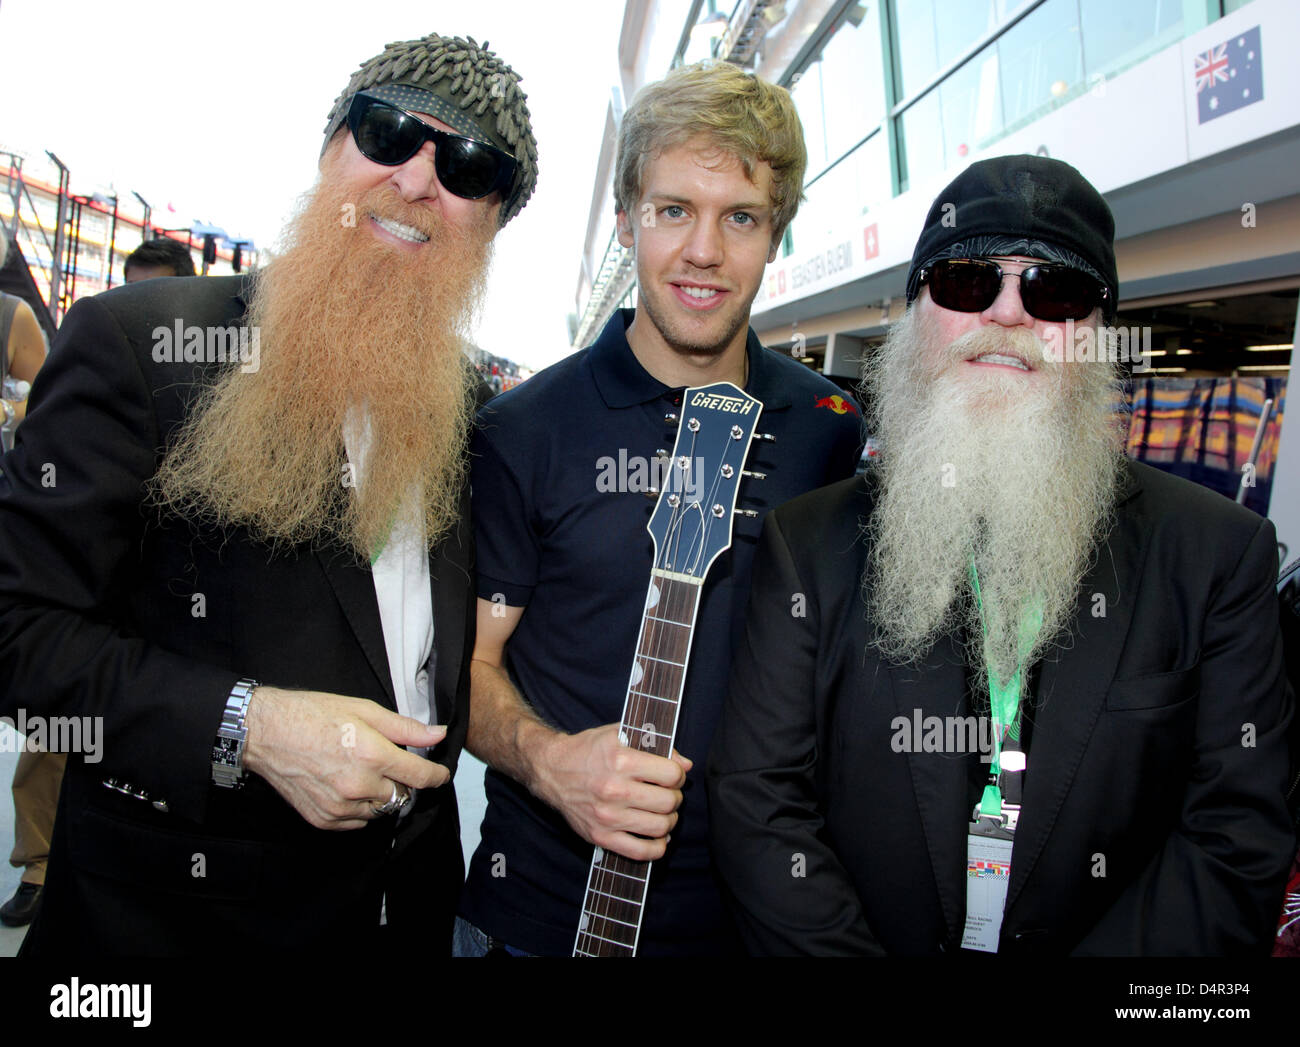 The members of ZZ Top, Dusty Hill (R) and Billy Gibbons (L), pose with German Formula One driver Sebastian Vettel of Red Bull in the paddock at Marina Bay Street Circuit in Singapore, Singapore, 23 September 2009. The Formula One Grand Prix of Singapore will be held on 27 September 2009. Photo: FELIX HEYDER Stock Photo